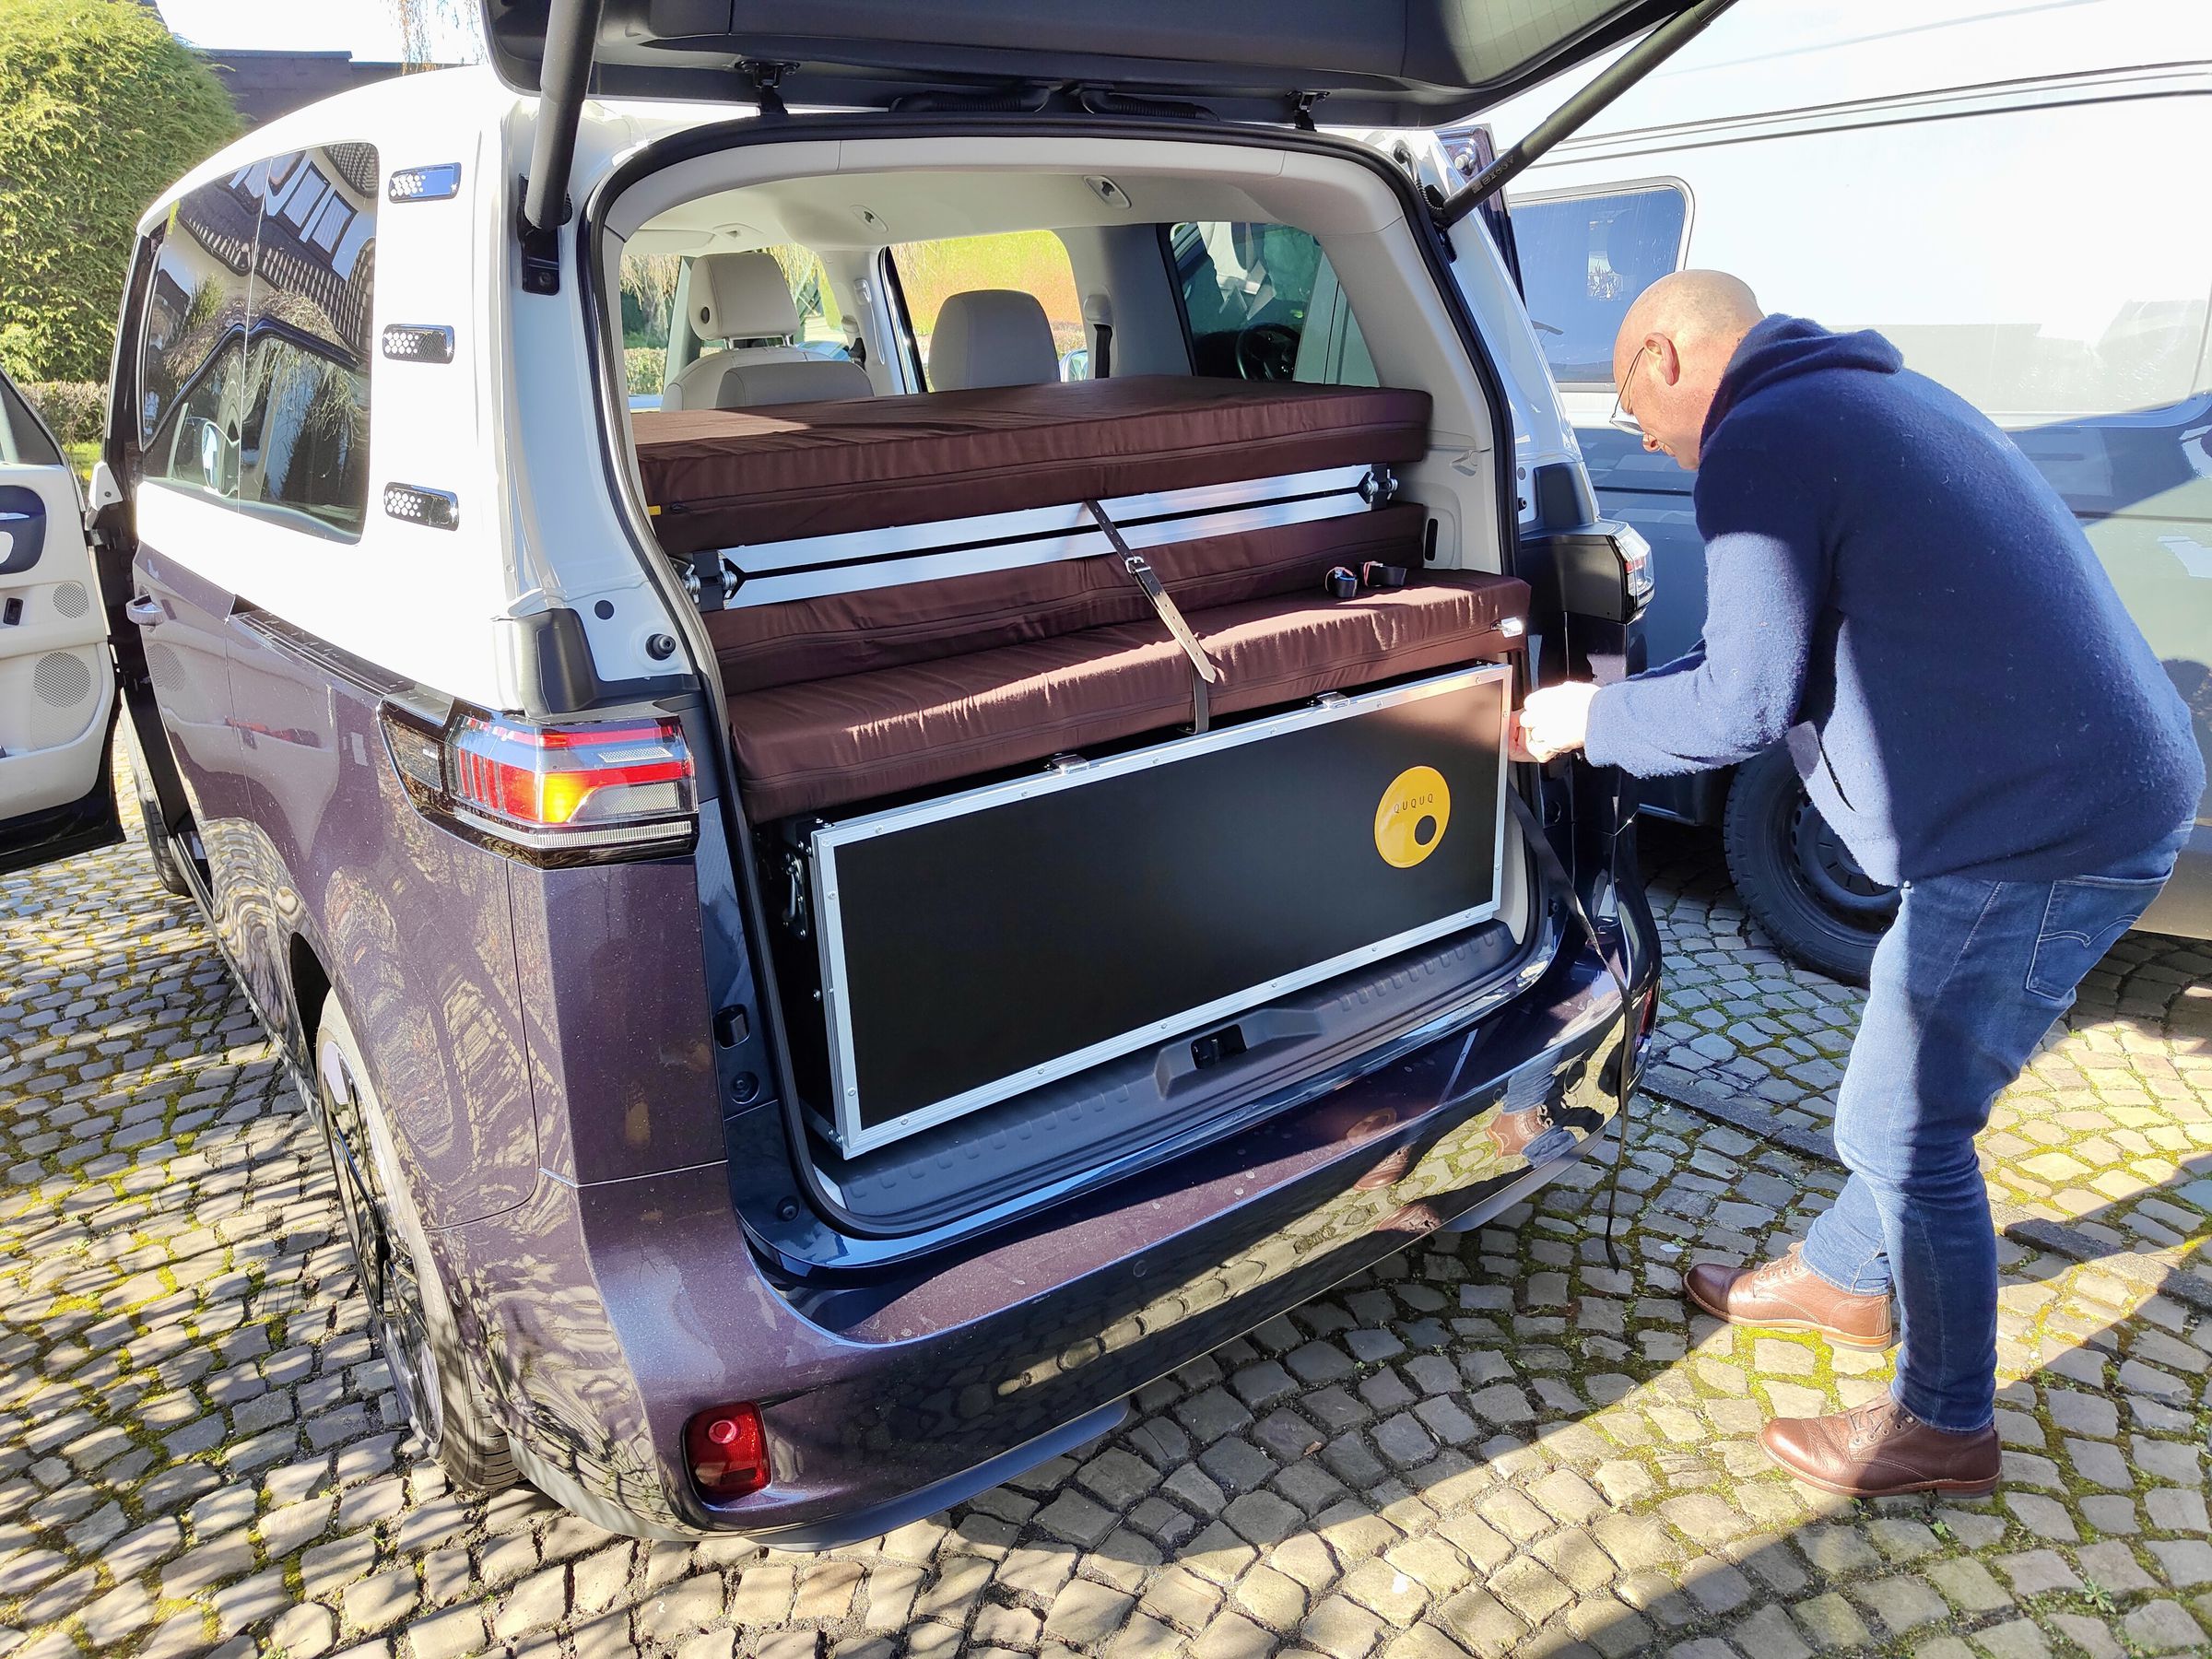 <em>Ququq founder Ulrich Vielmetter finishes up the installation outside his office in Germany. It only took about 10 minutes.</em>